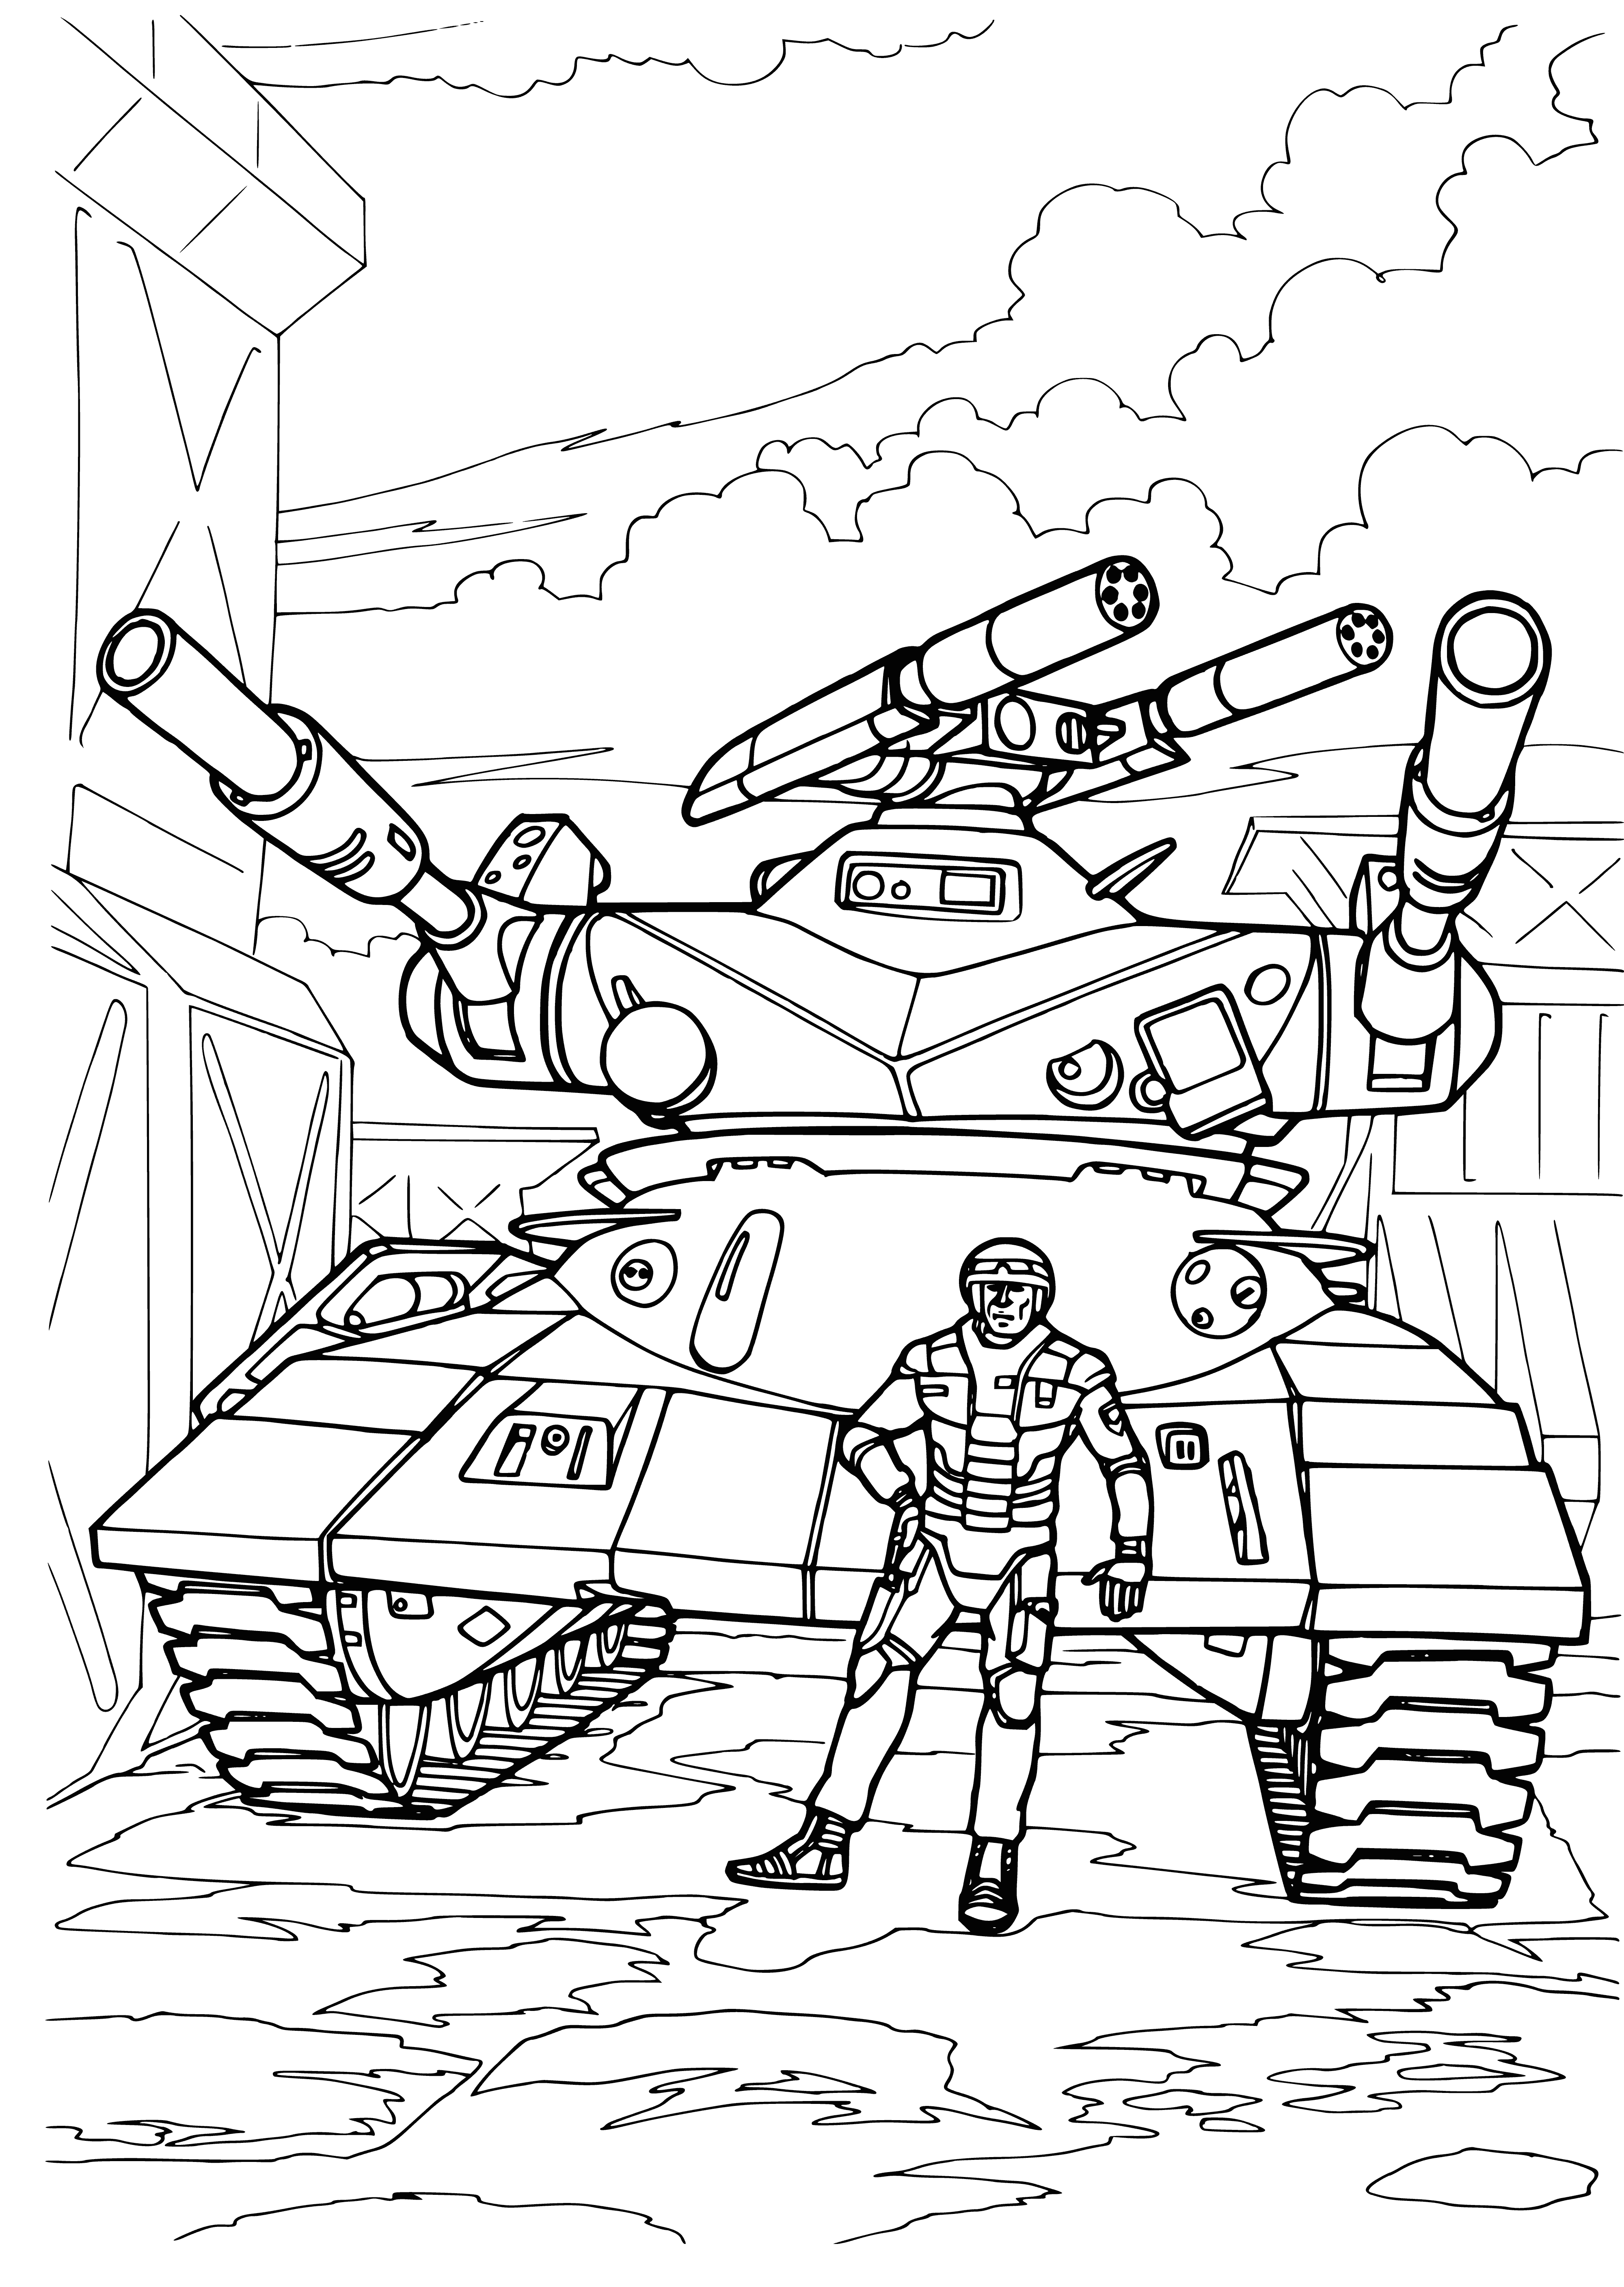 coloring page: A gray tank with a green turret rests in a field of green grass with trees in background.